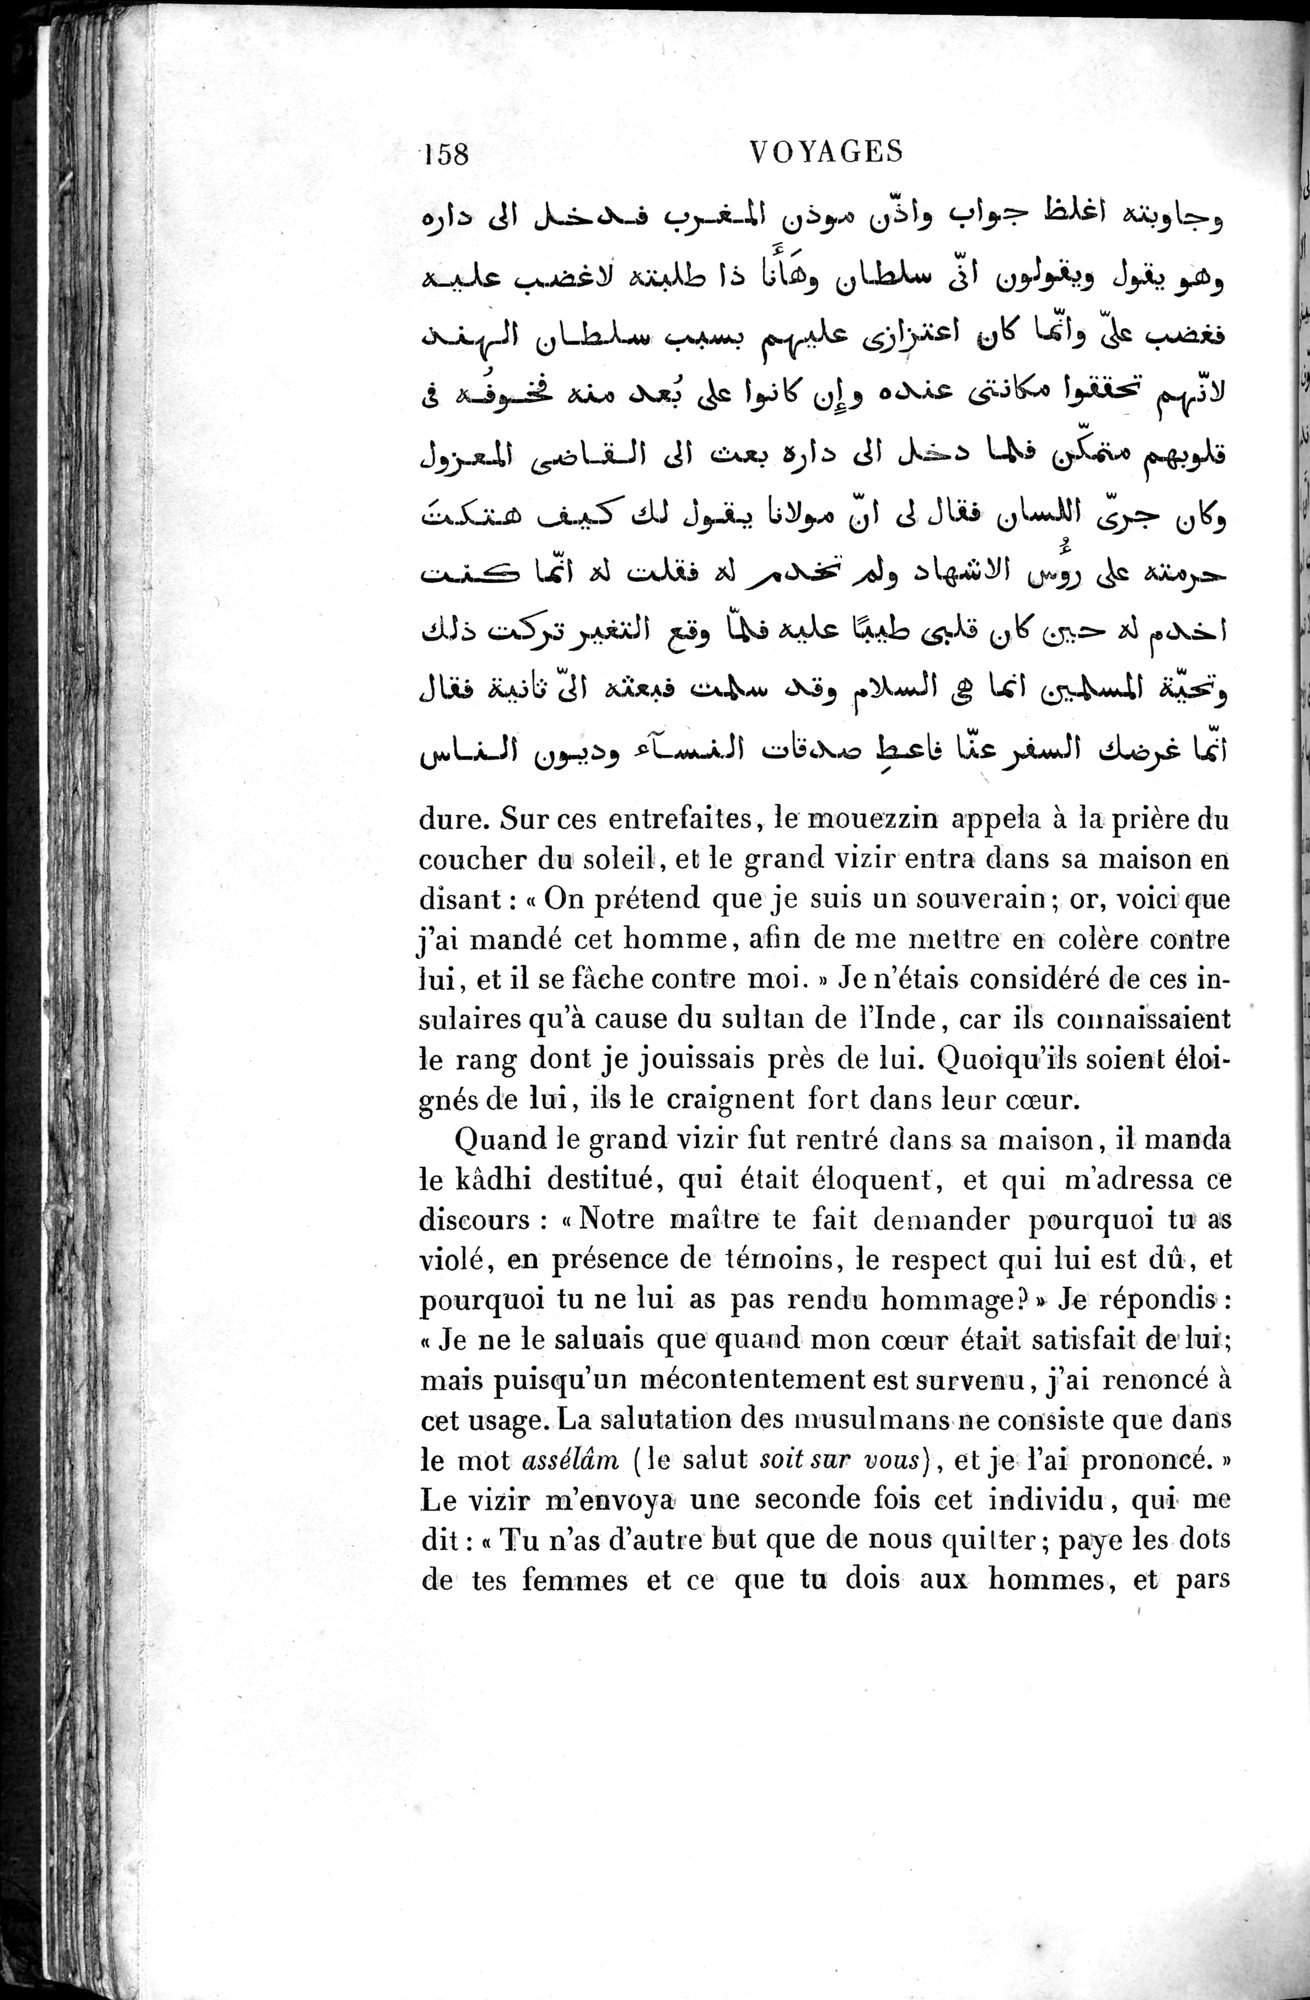 Voyages d'Ibn Batoutah : vol.4 / Page 170 (Grayscale High Resolution Image)